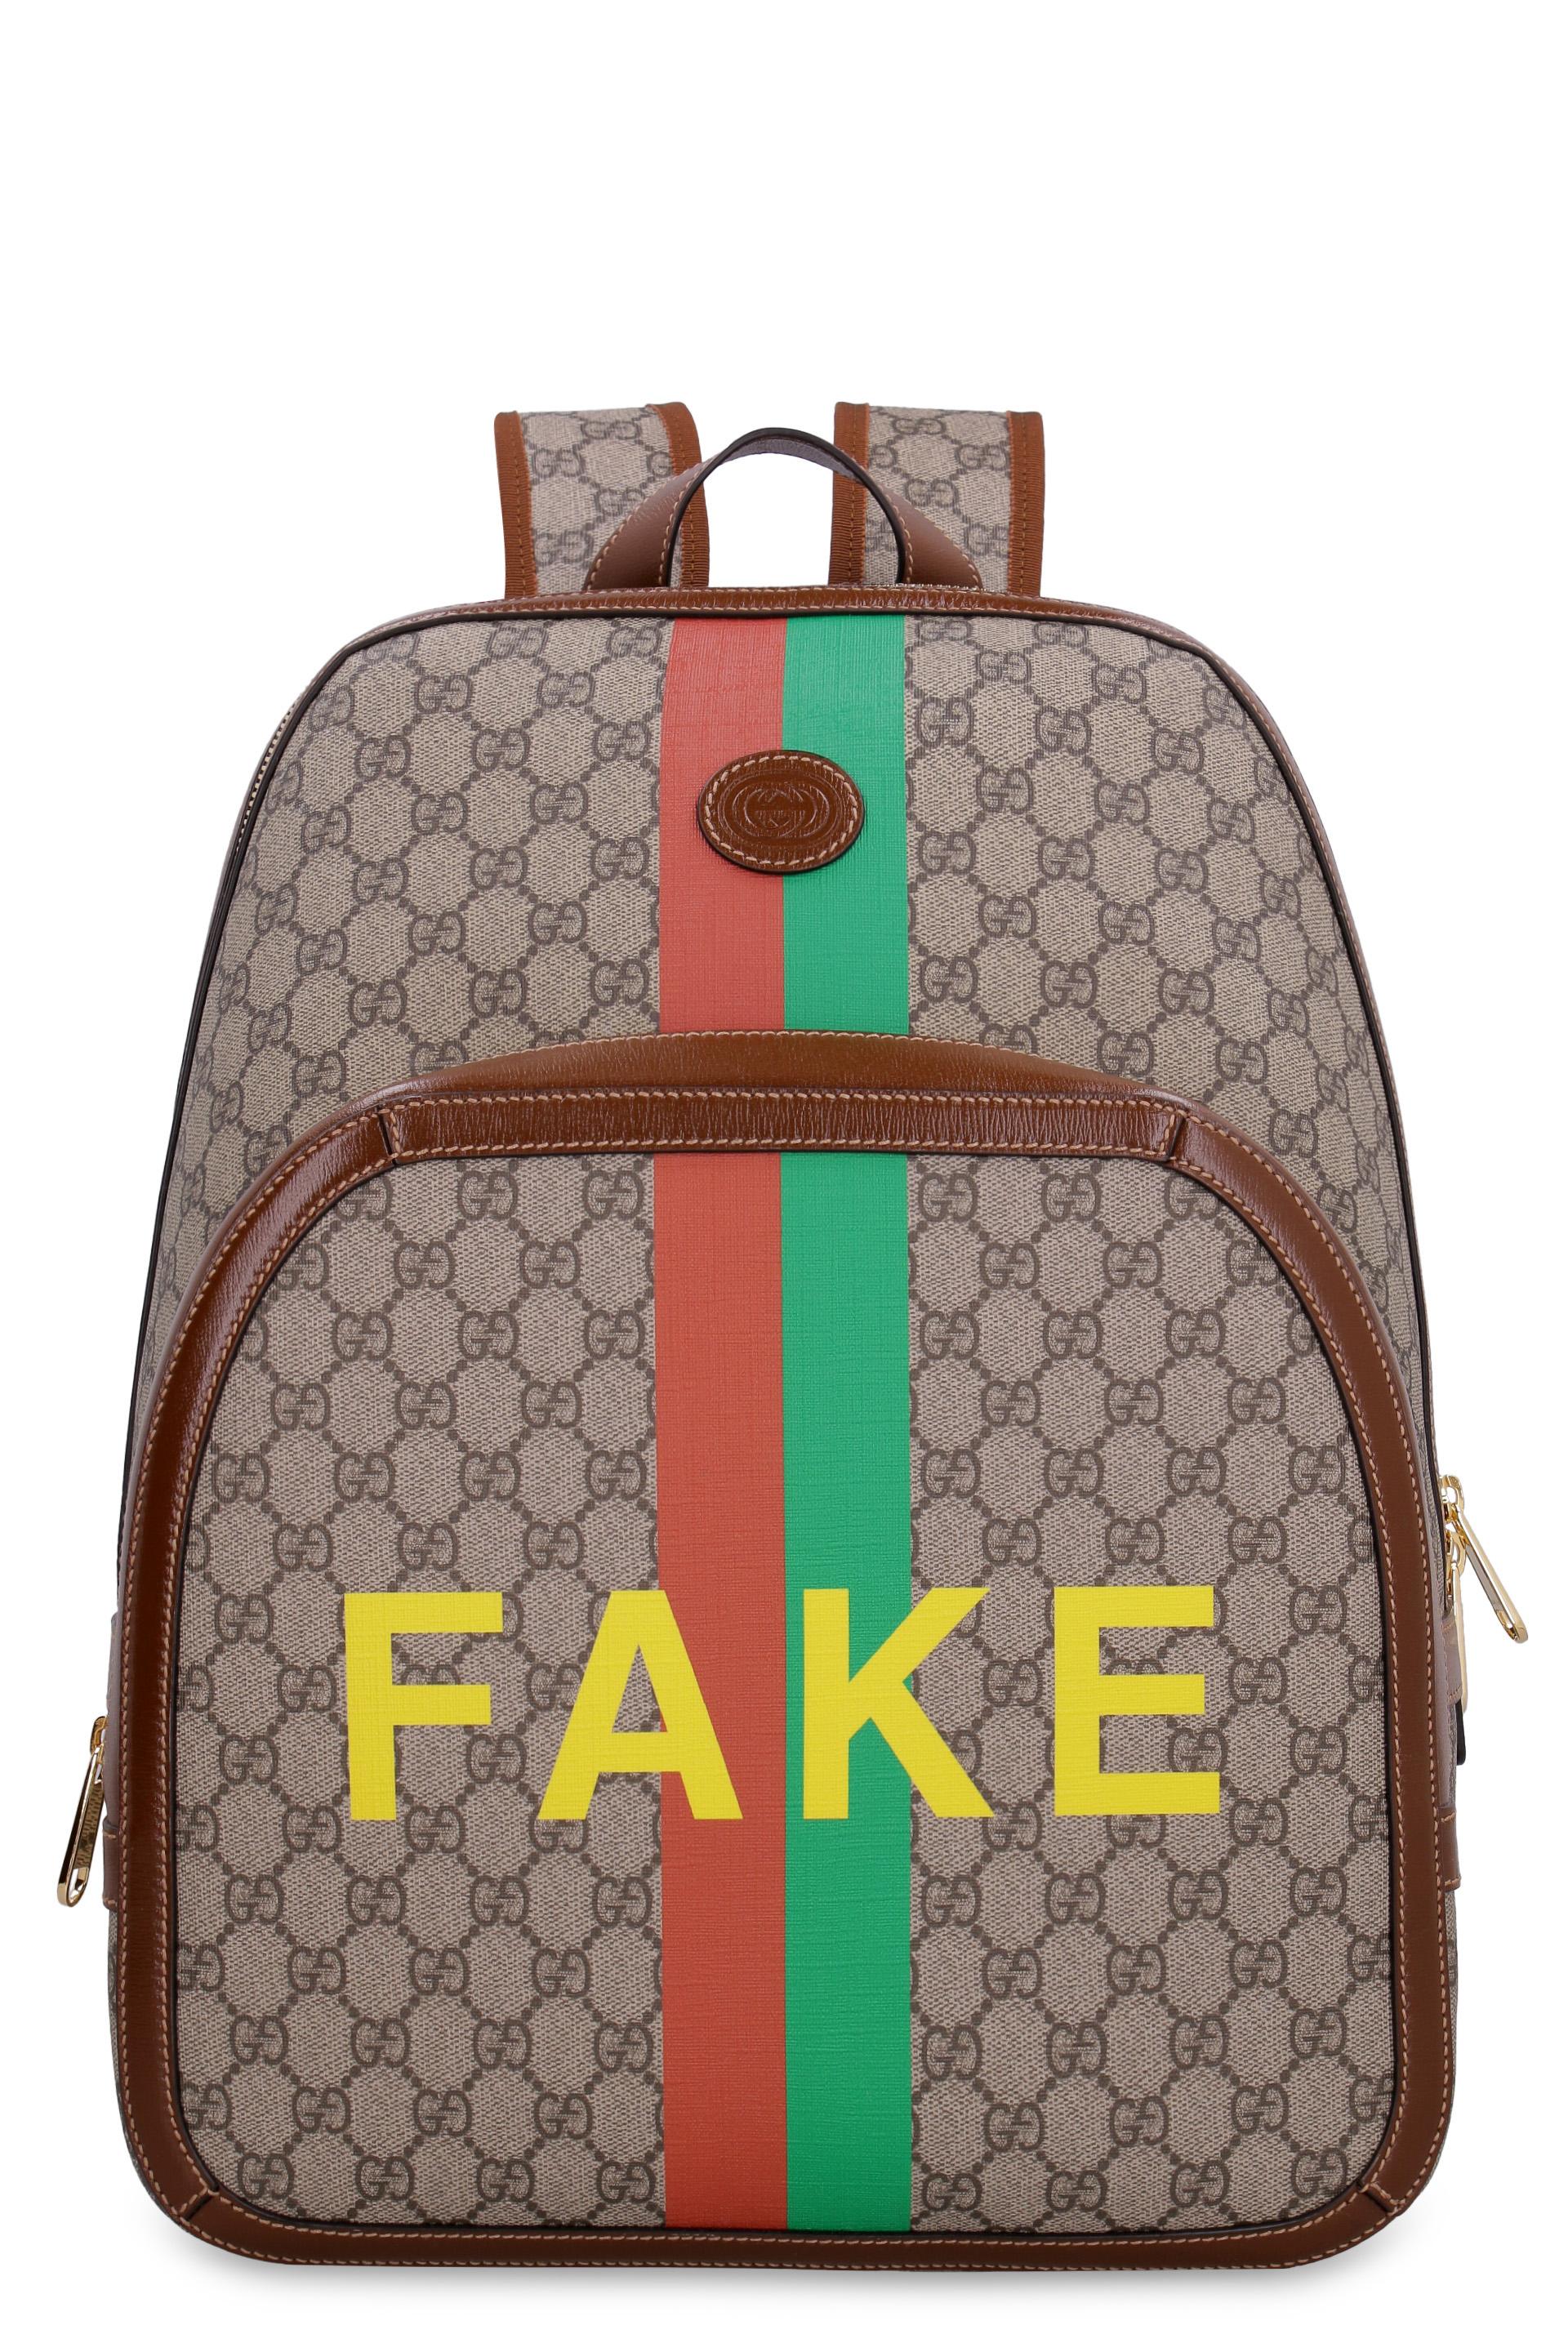 Gucci GG Supreme Fabric Backpack in Natural for Men | Lyst